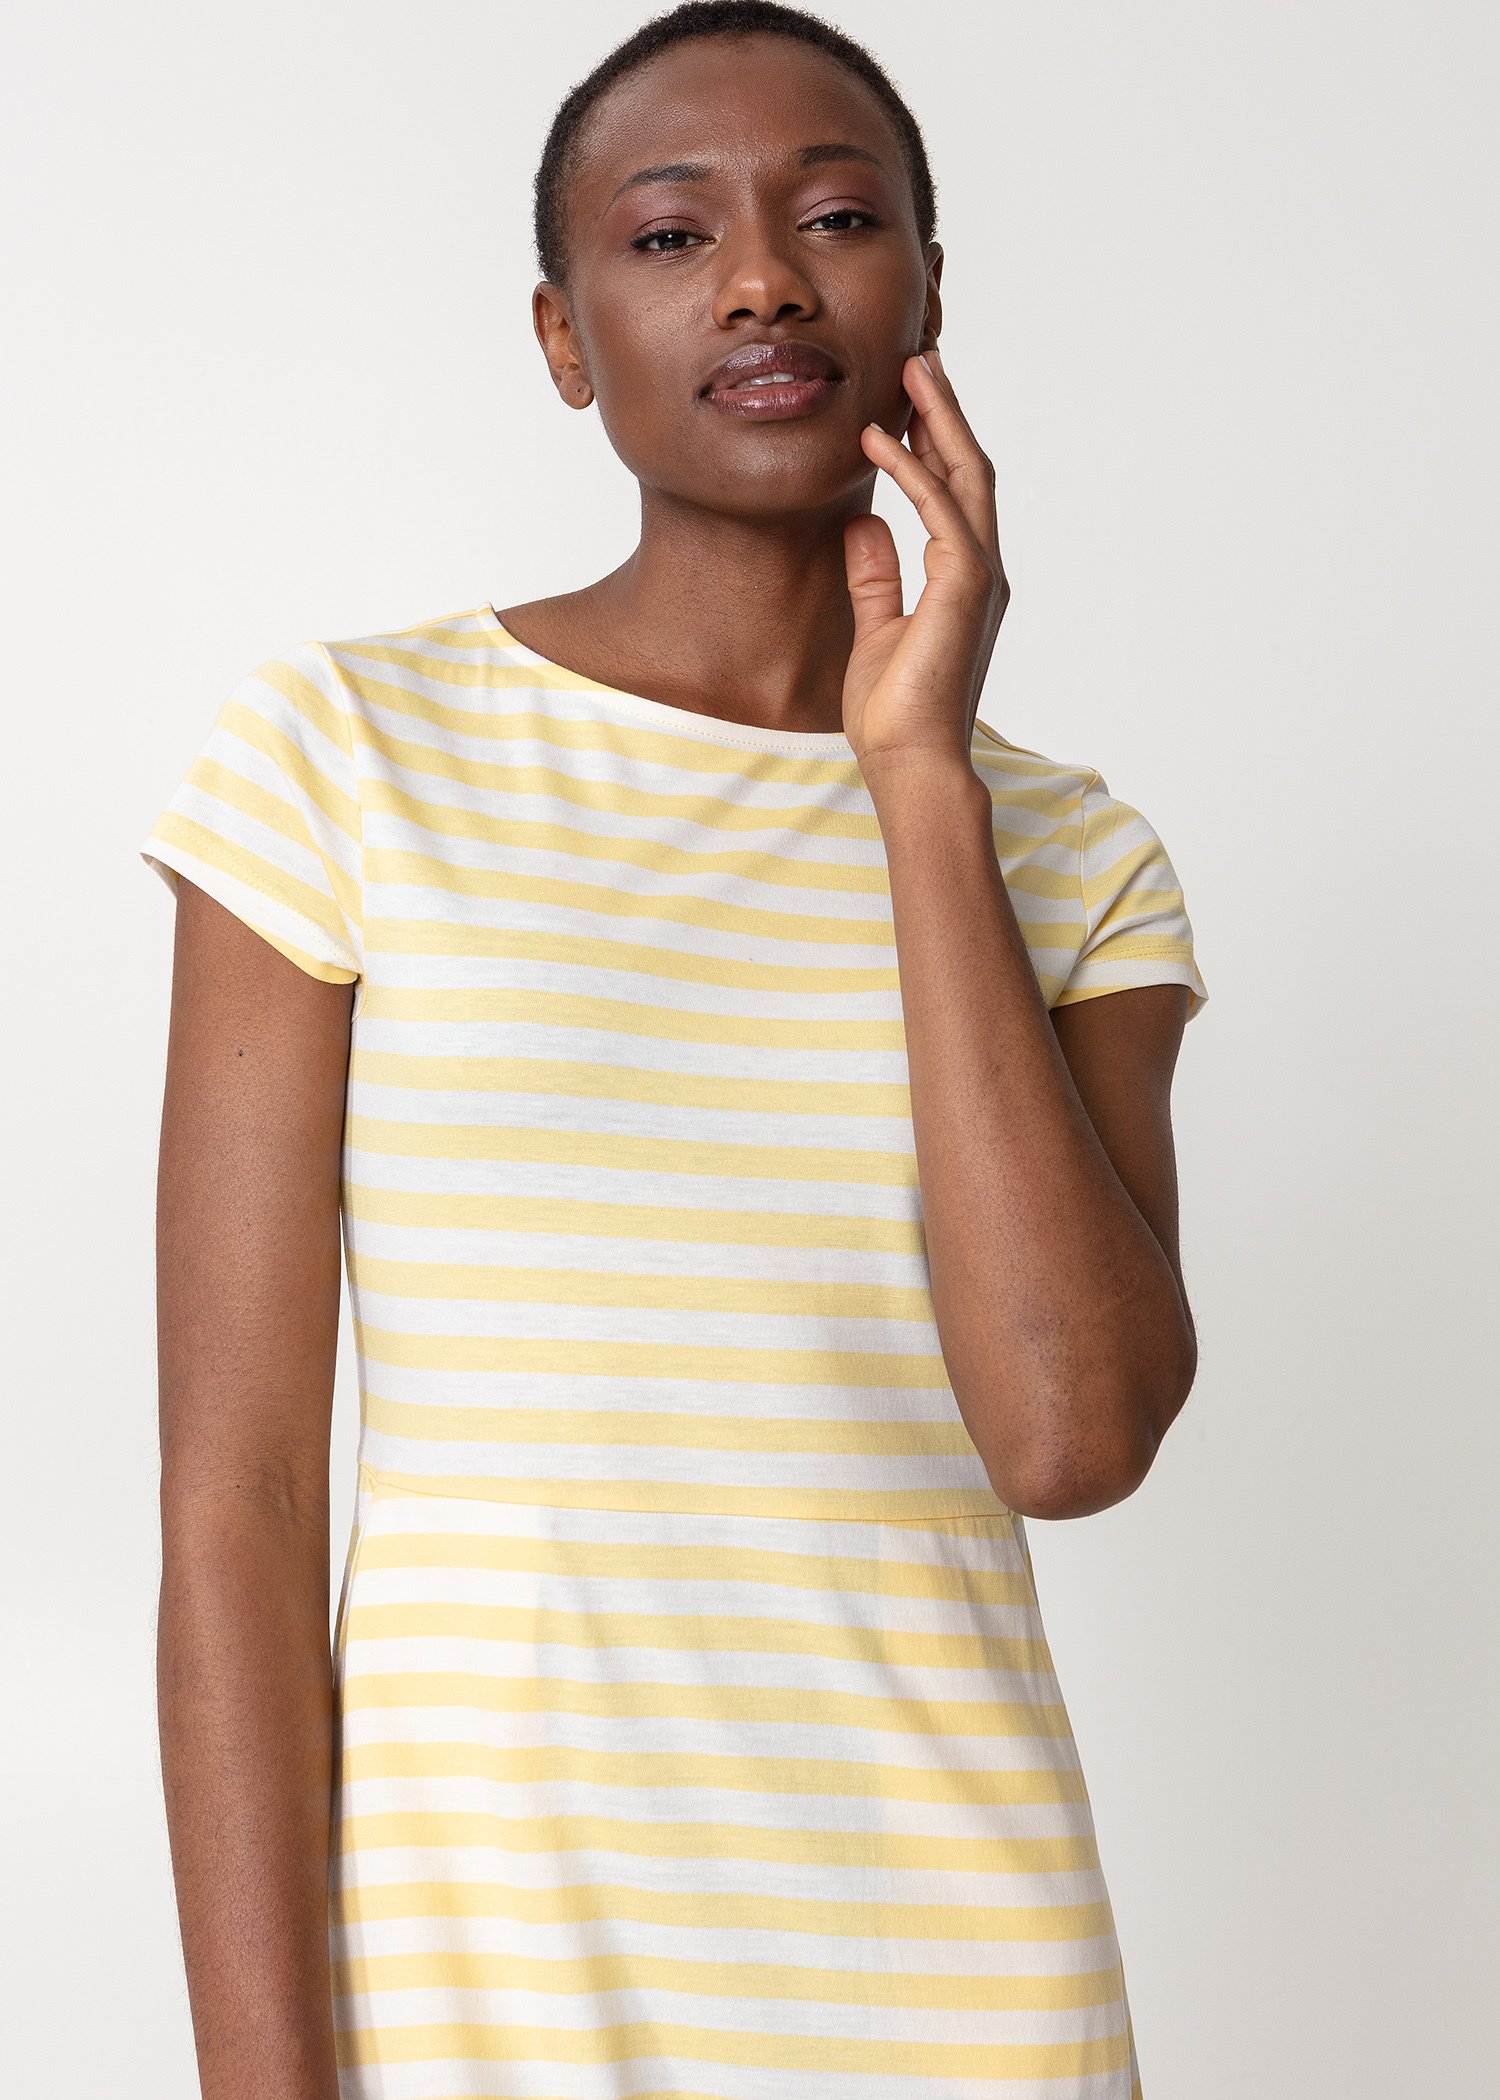 Striped dress with pockets Image 1